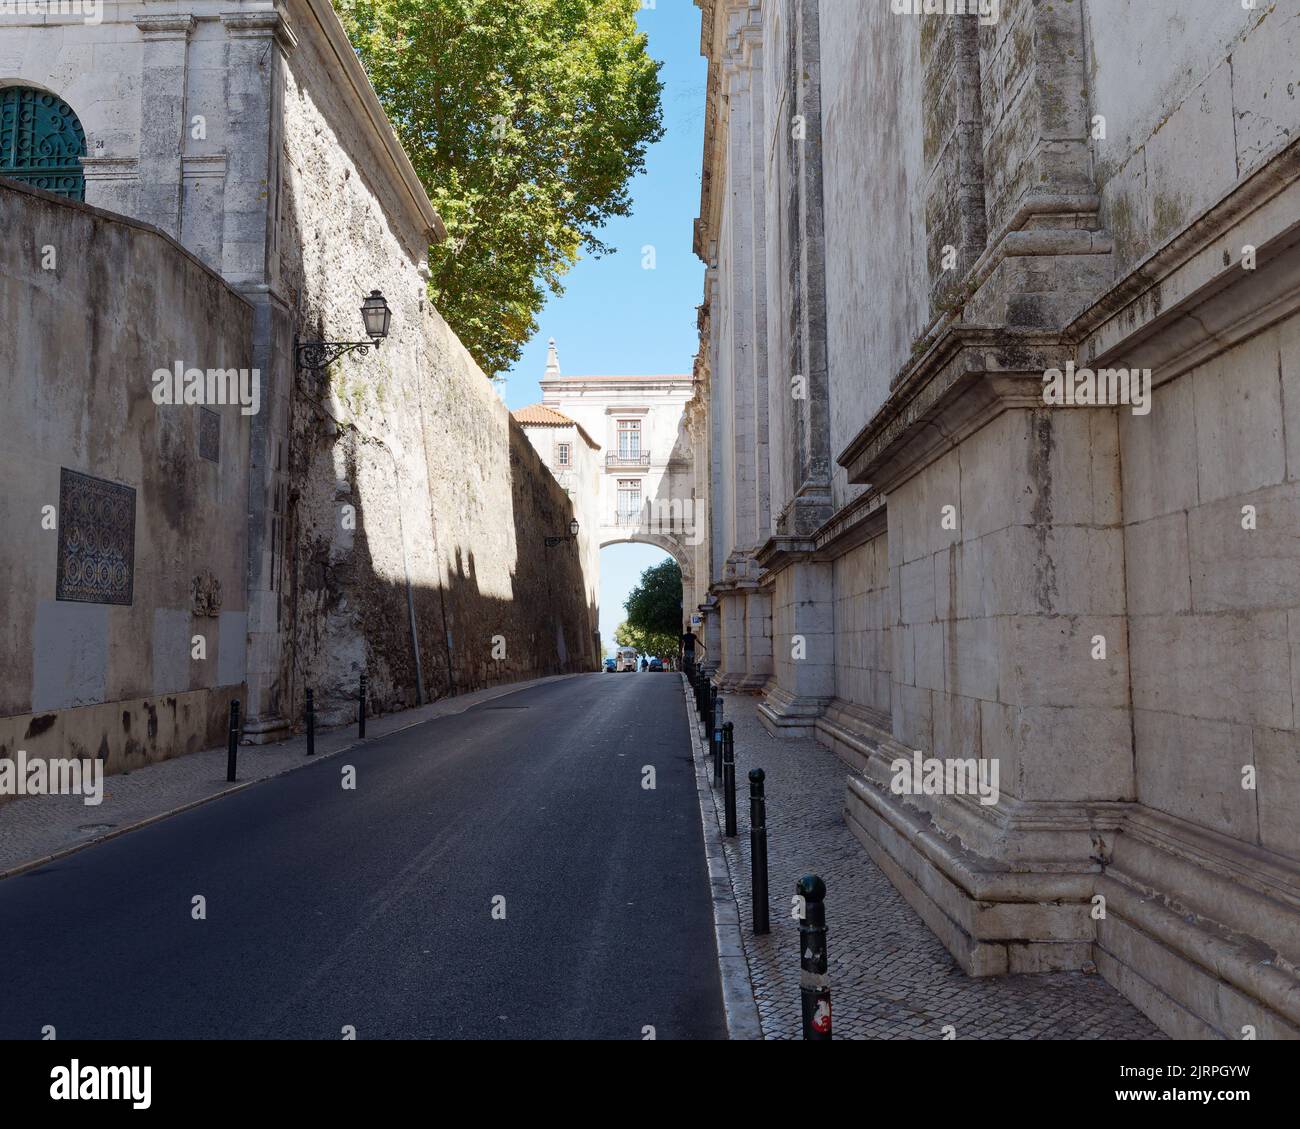 Road with quaint arch connecting the  Monastery of São Vicente de Fora (Monastery of Saint Vincent Outside the Walls) on the right. Lisbon, Portugal. Stock Photo